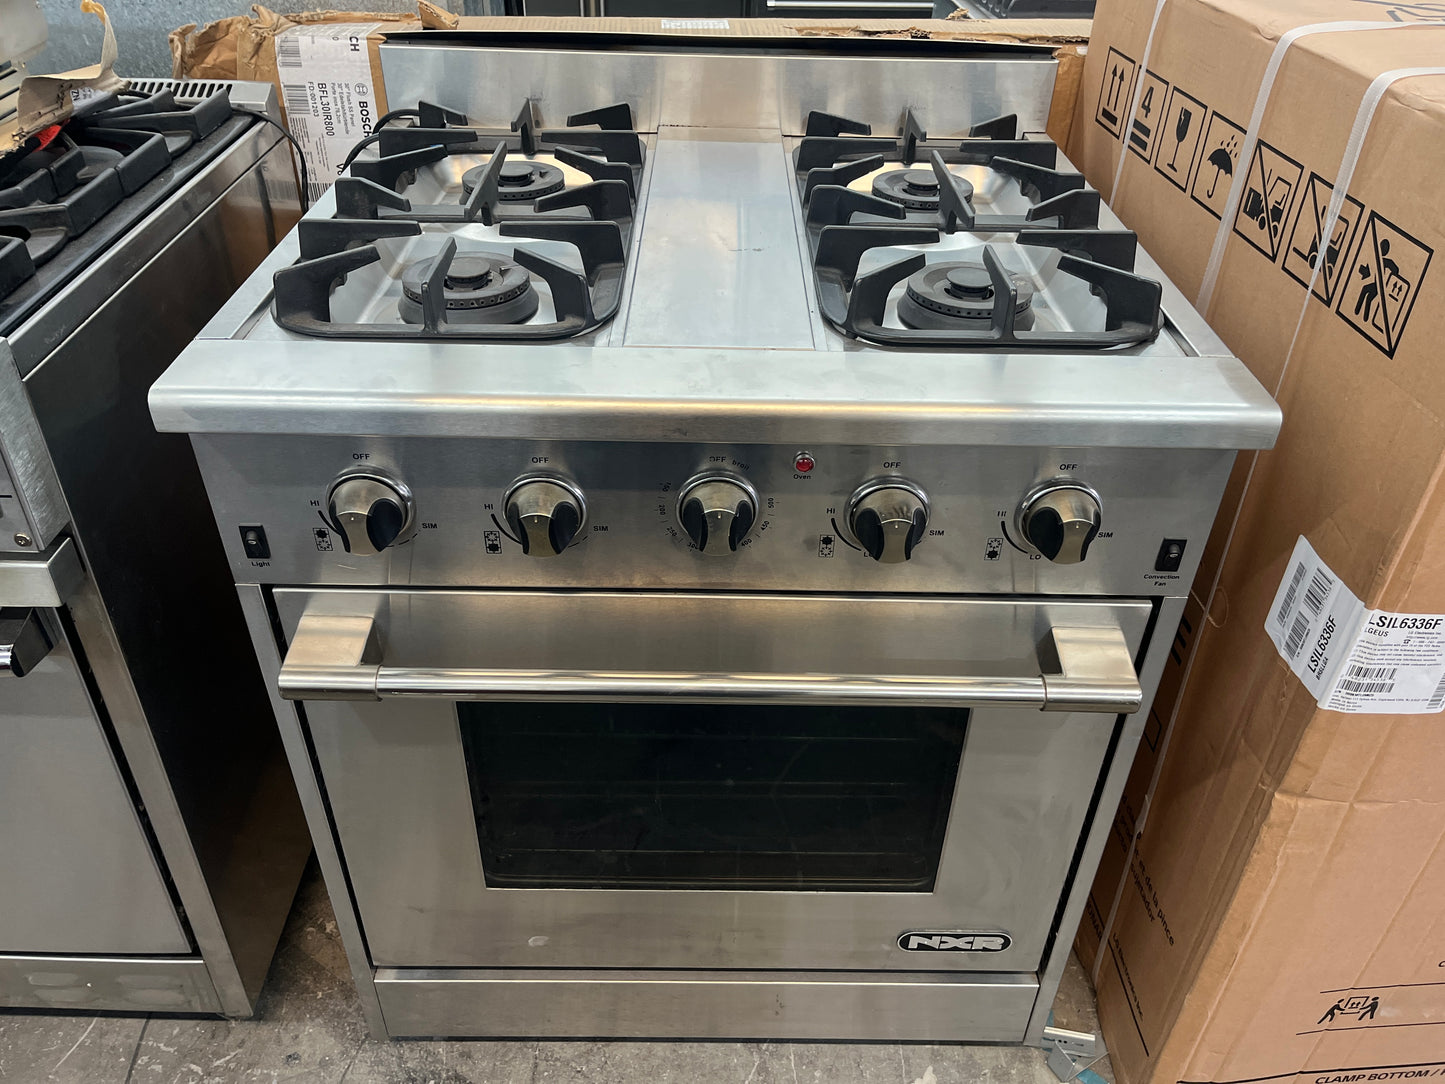 NXR 30 Inch Pro-Style All Gas Range 4 Sealed Burners, DRGB3001, Convection Oven,4.2. Cu. Ft.,Simmer Burner,16,500 BTU Infrared Broiler,Heavy Duty Cast-Iron Grates,Extra Large Oven Window,Towel-Bar Handle,Stainless Steel 369118